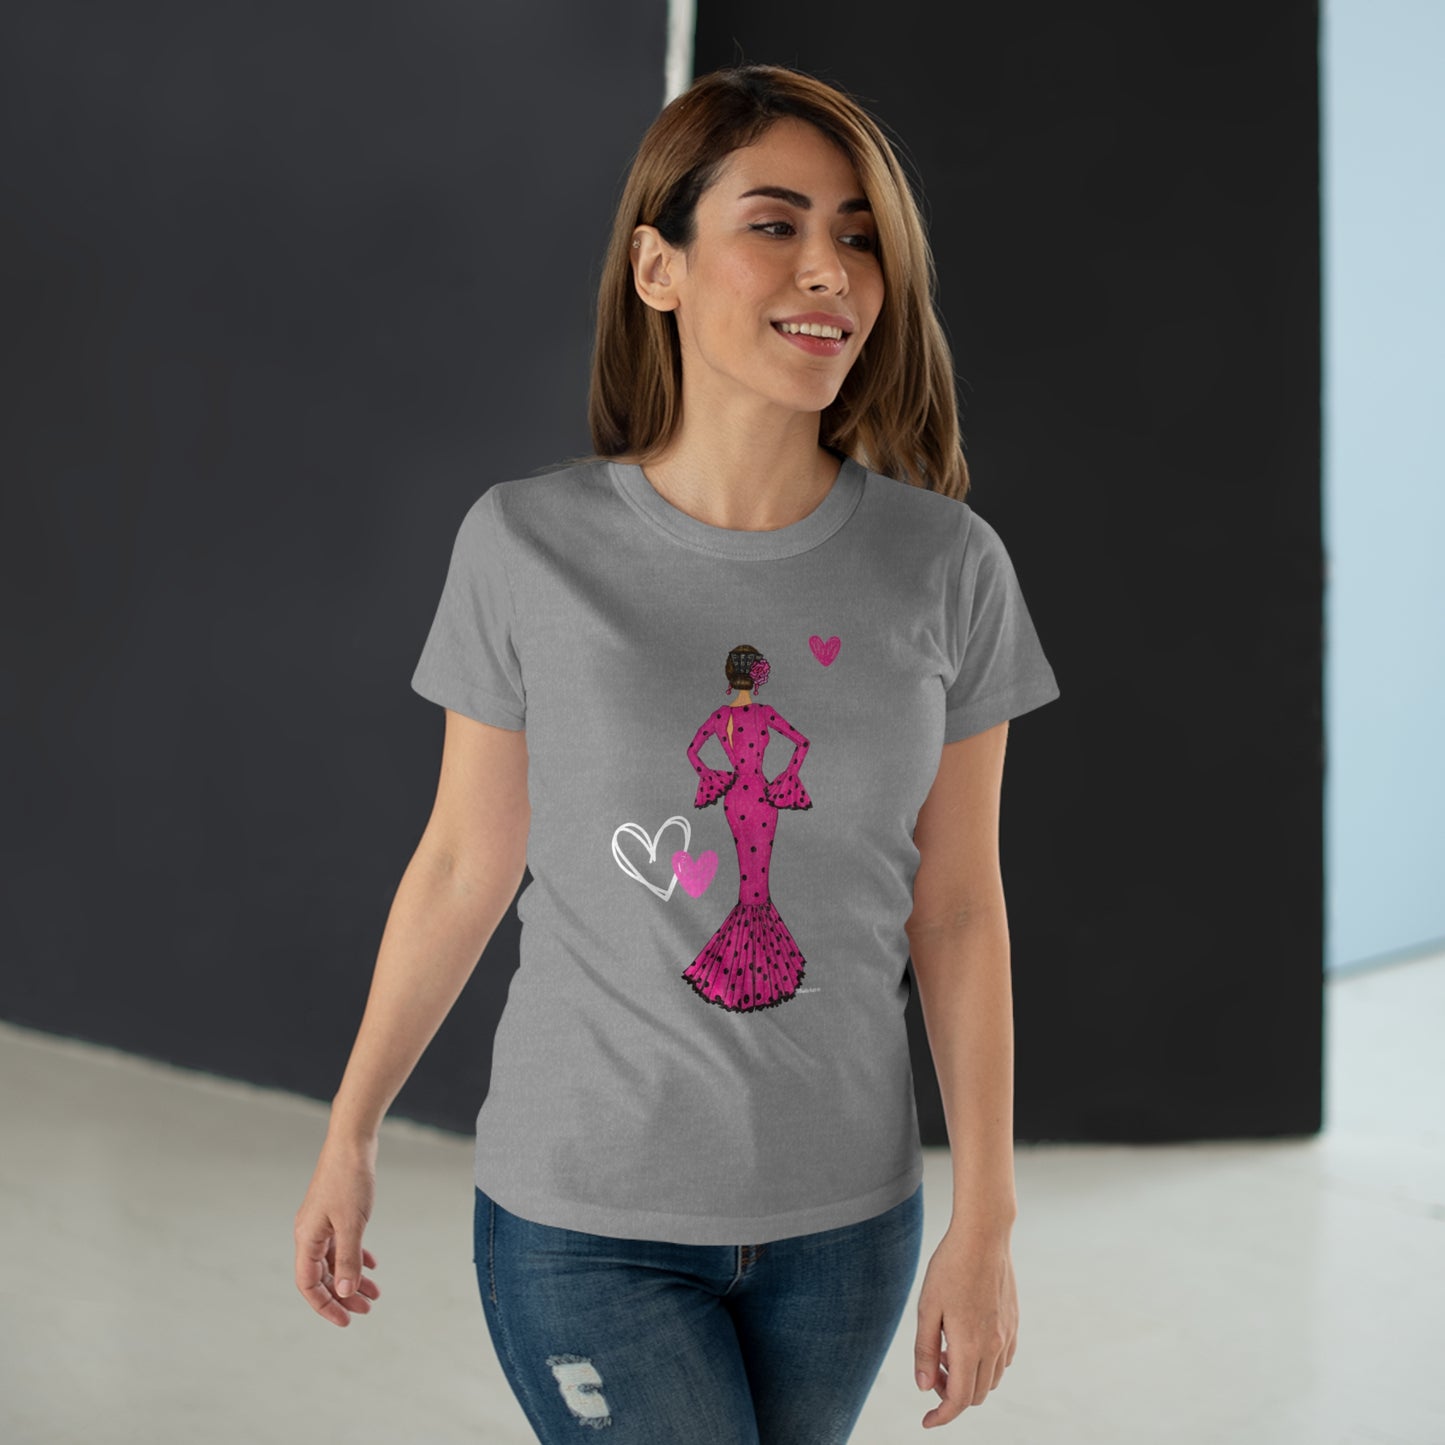 a woman wearing a t - shirt with a pink dress on it